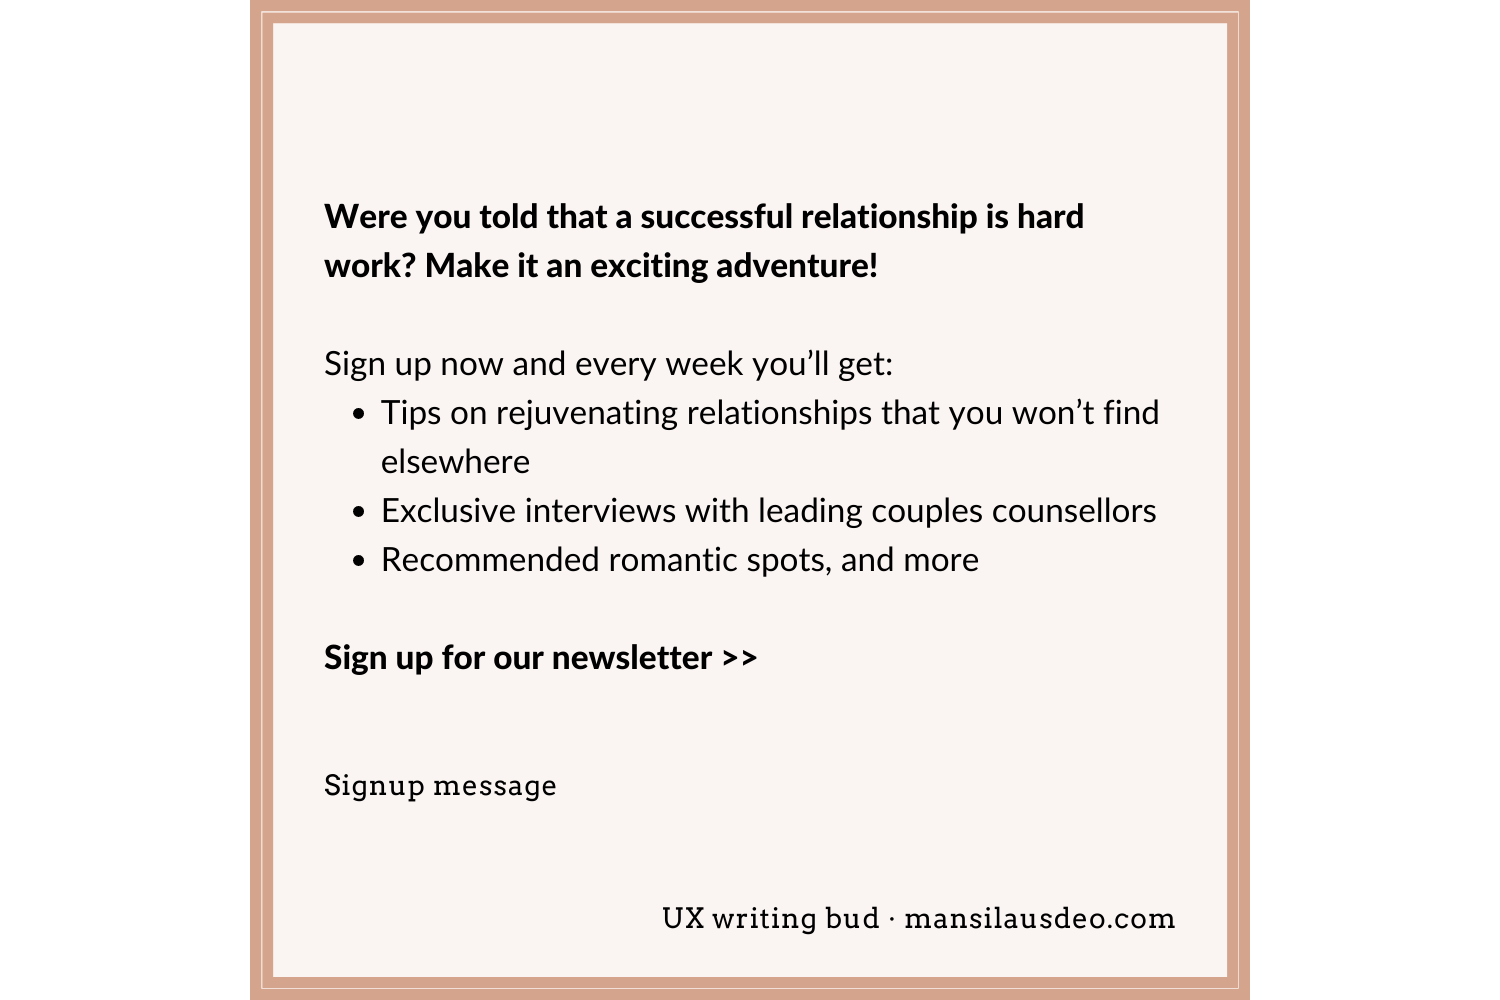 ign up now and every week you’ll get: Tips on rejuvenating relationships that you won’t find elsewhere Exclusive interviews with leading couples counsellors Recommended romantic spots, and more Sign up for our newsletter >> UX writing bud